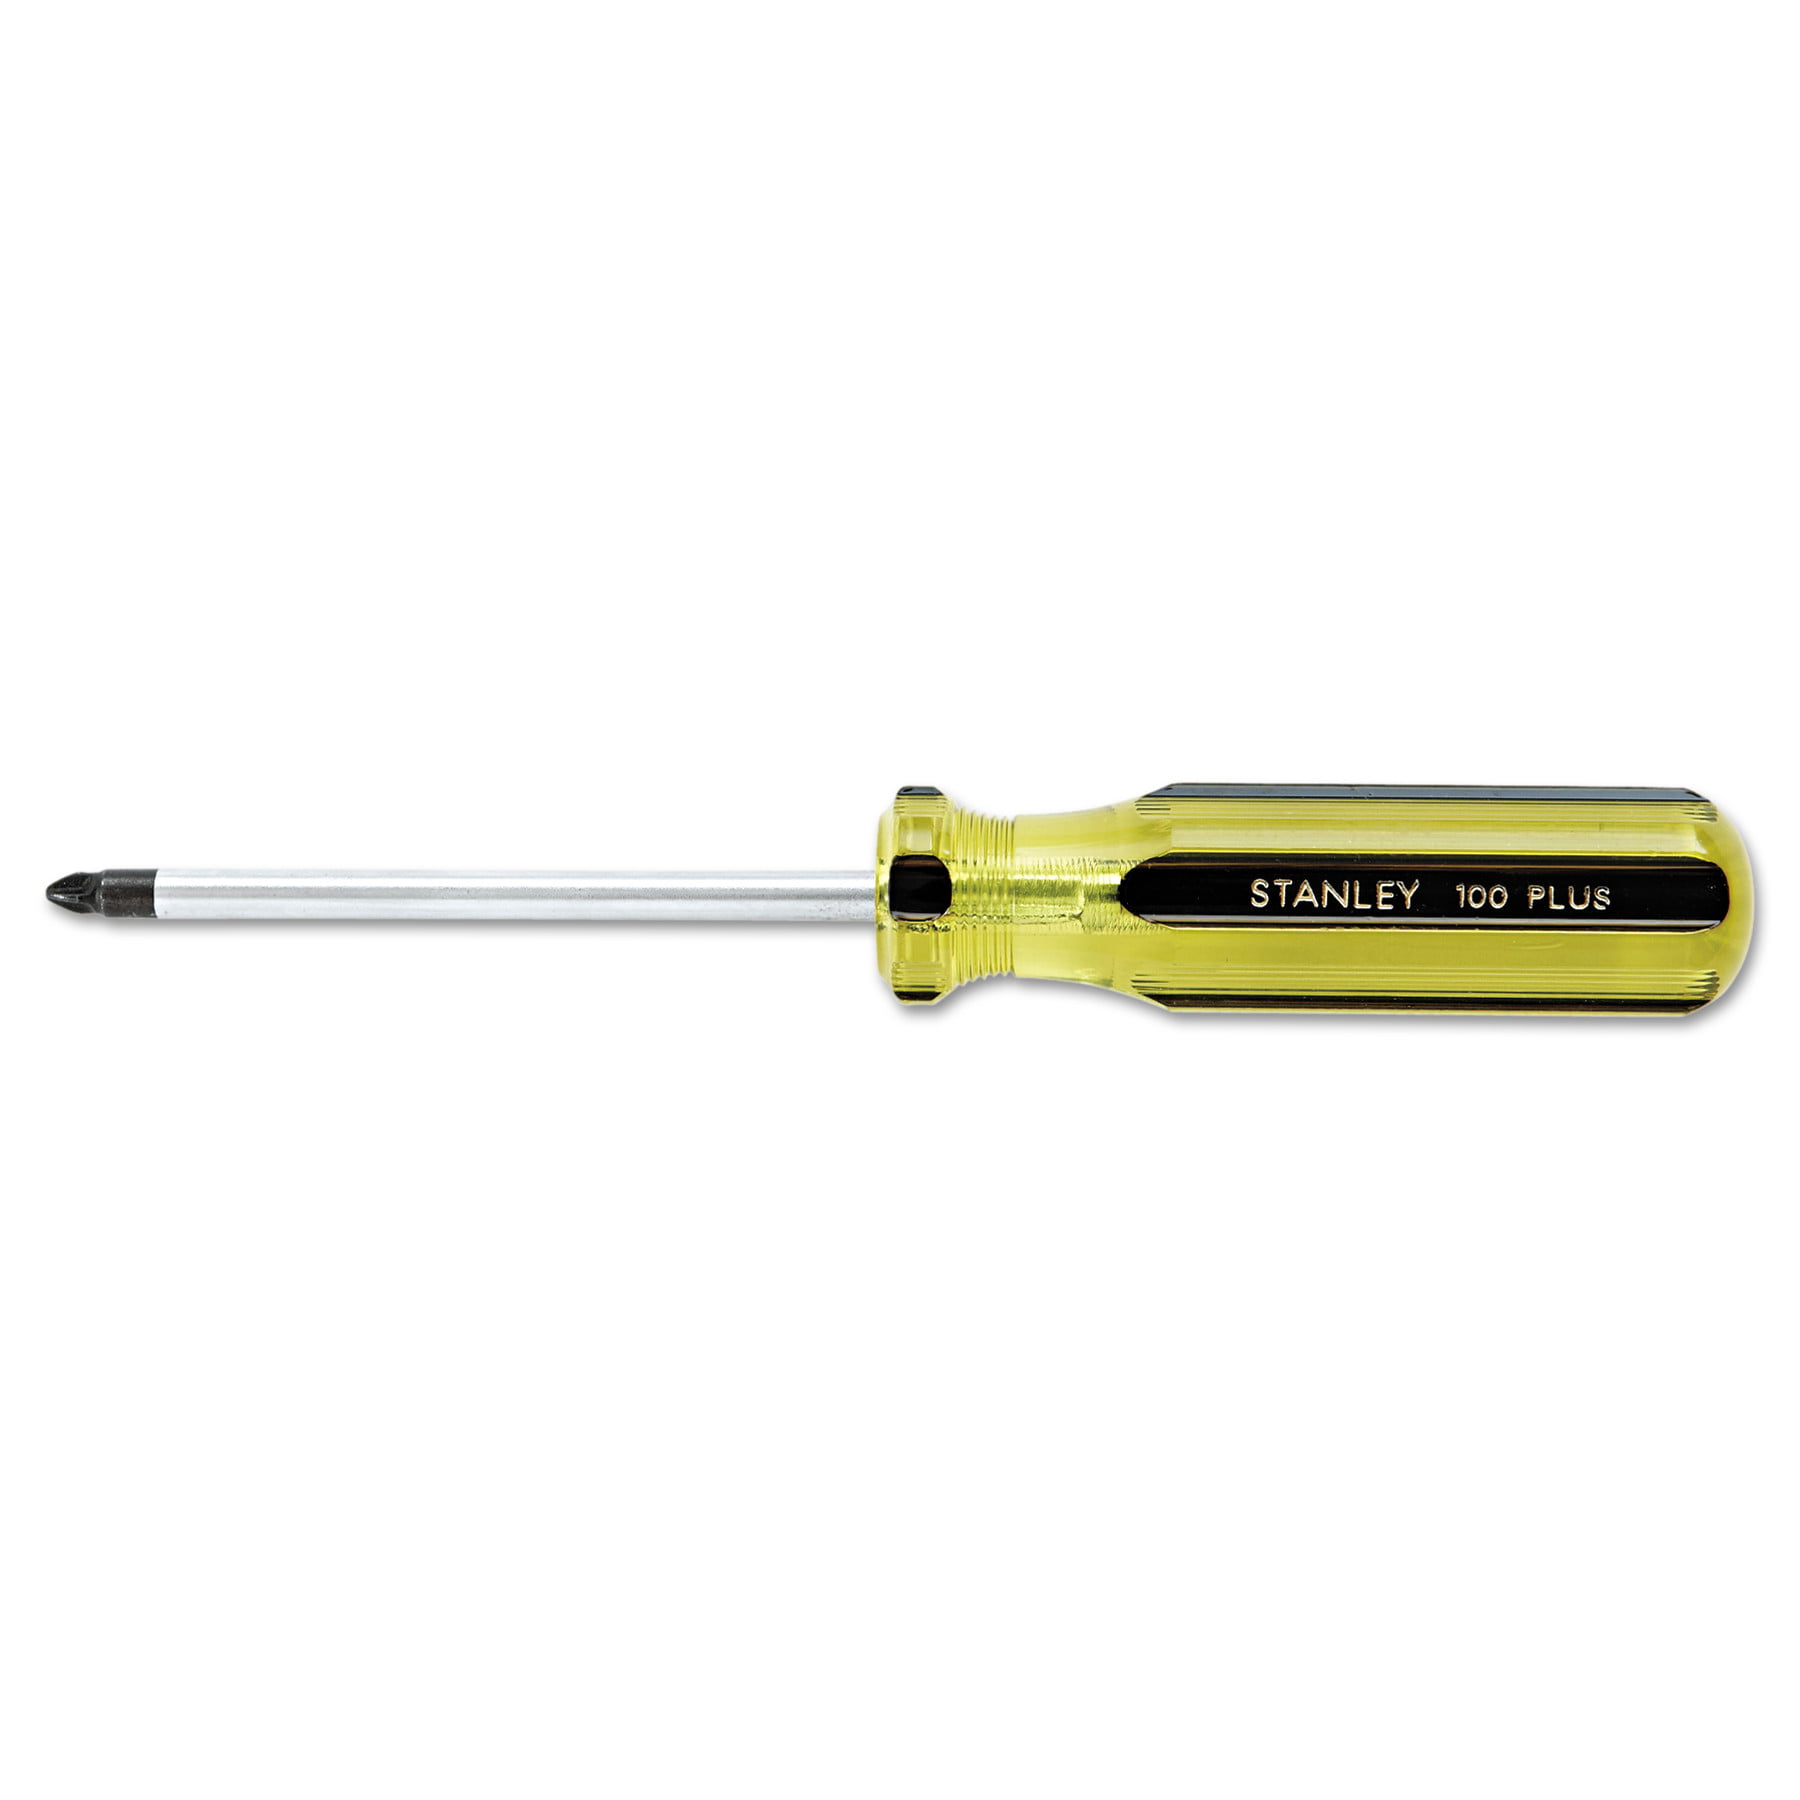 3/16 Inch X 3 Inch Stanley 66-163 100 Plus Standard Slotted Tip Screwdriver